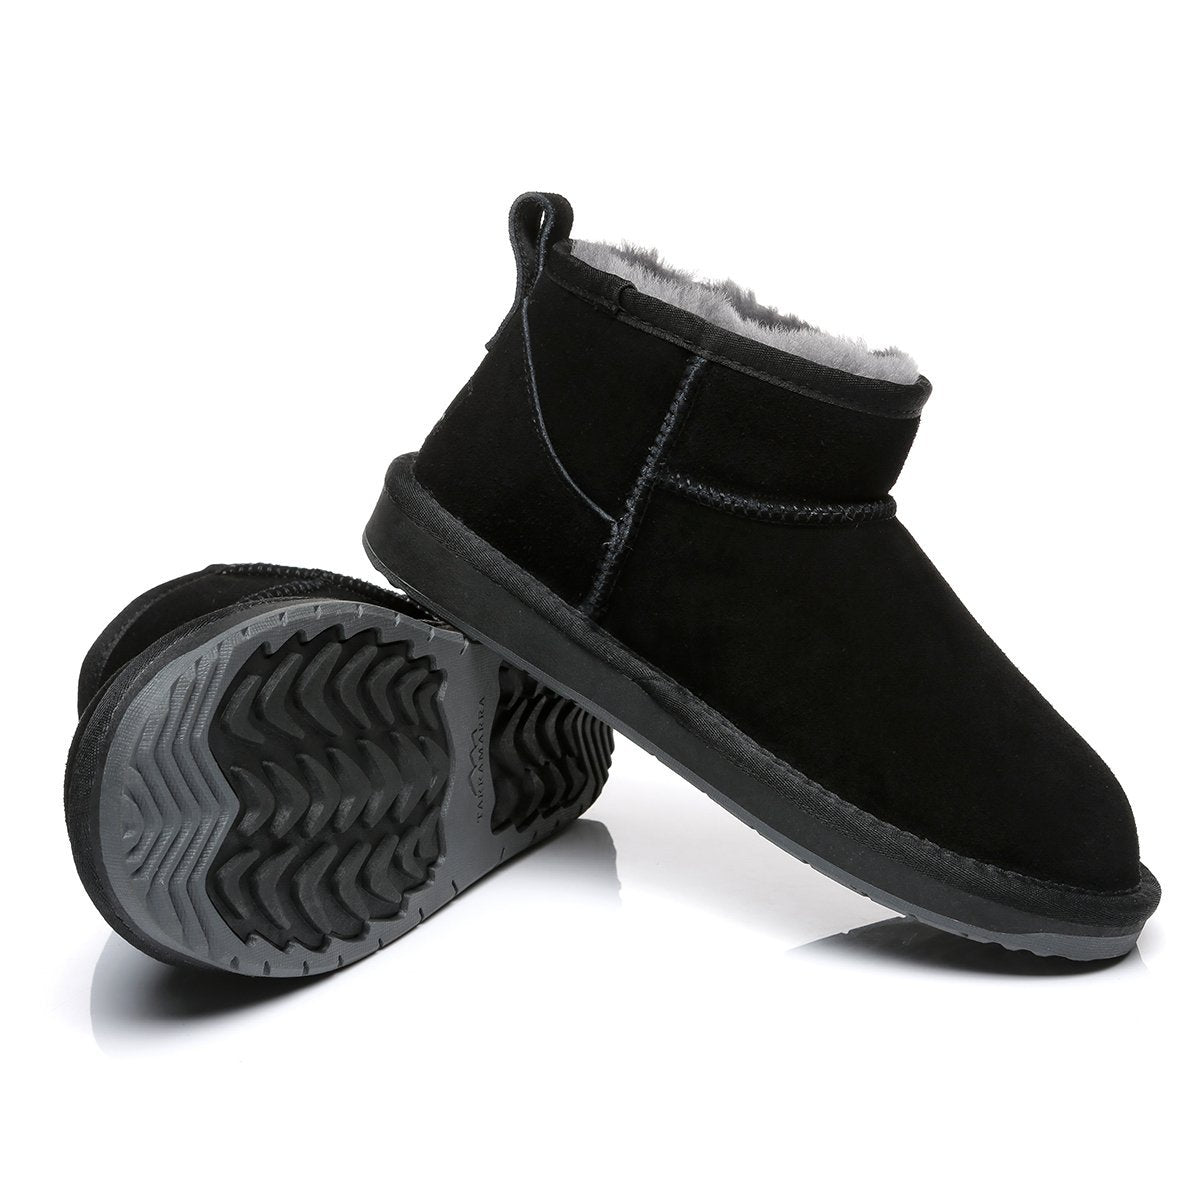 UGG Mini Ankle Boots